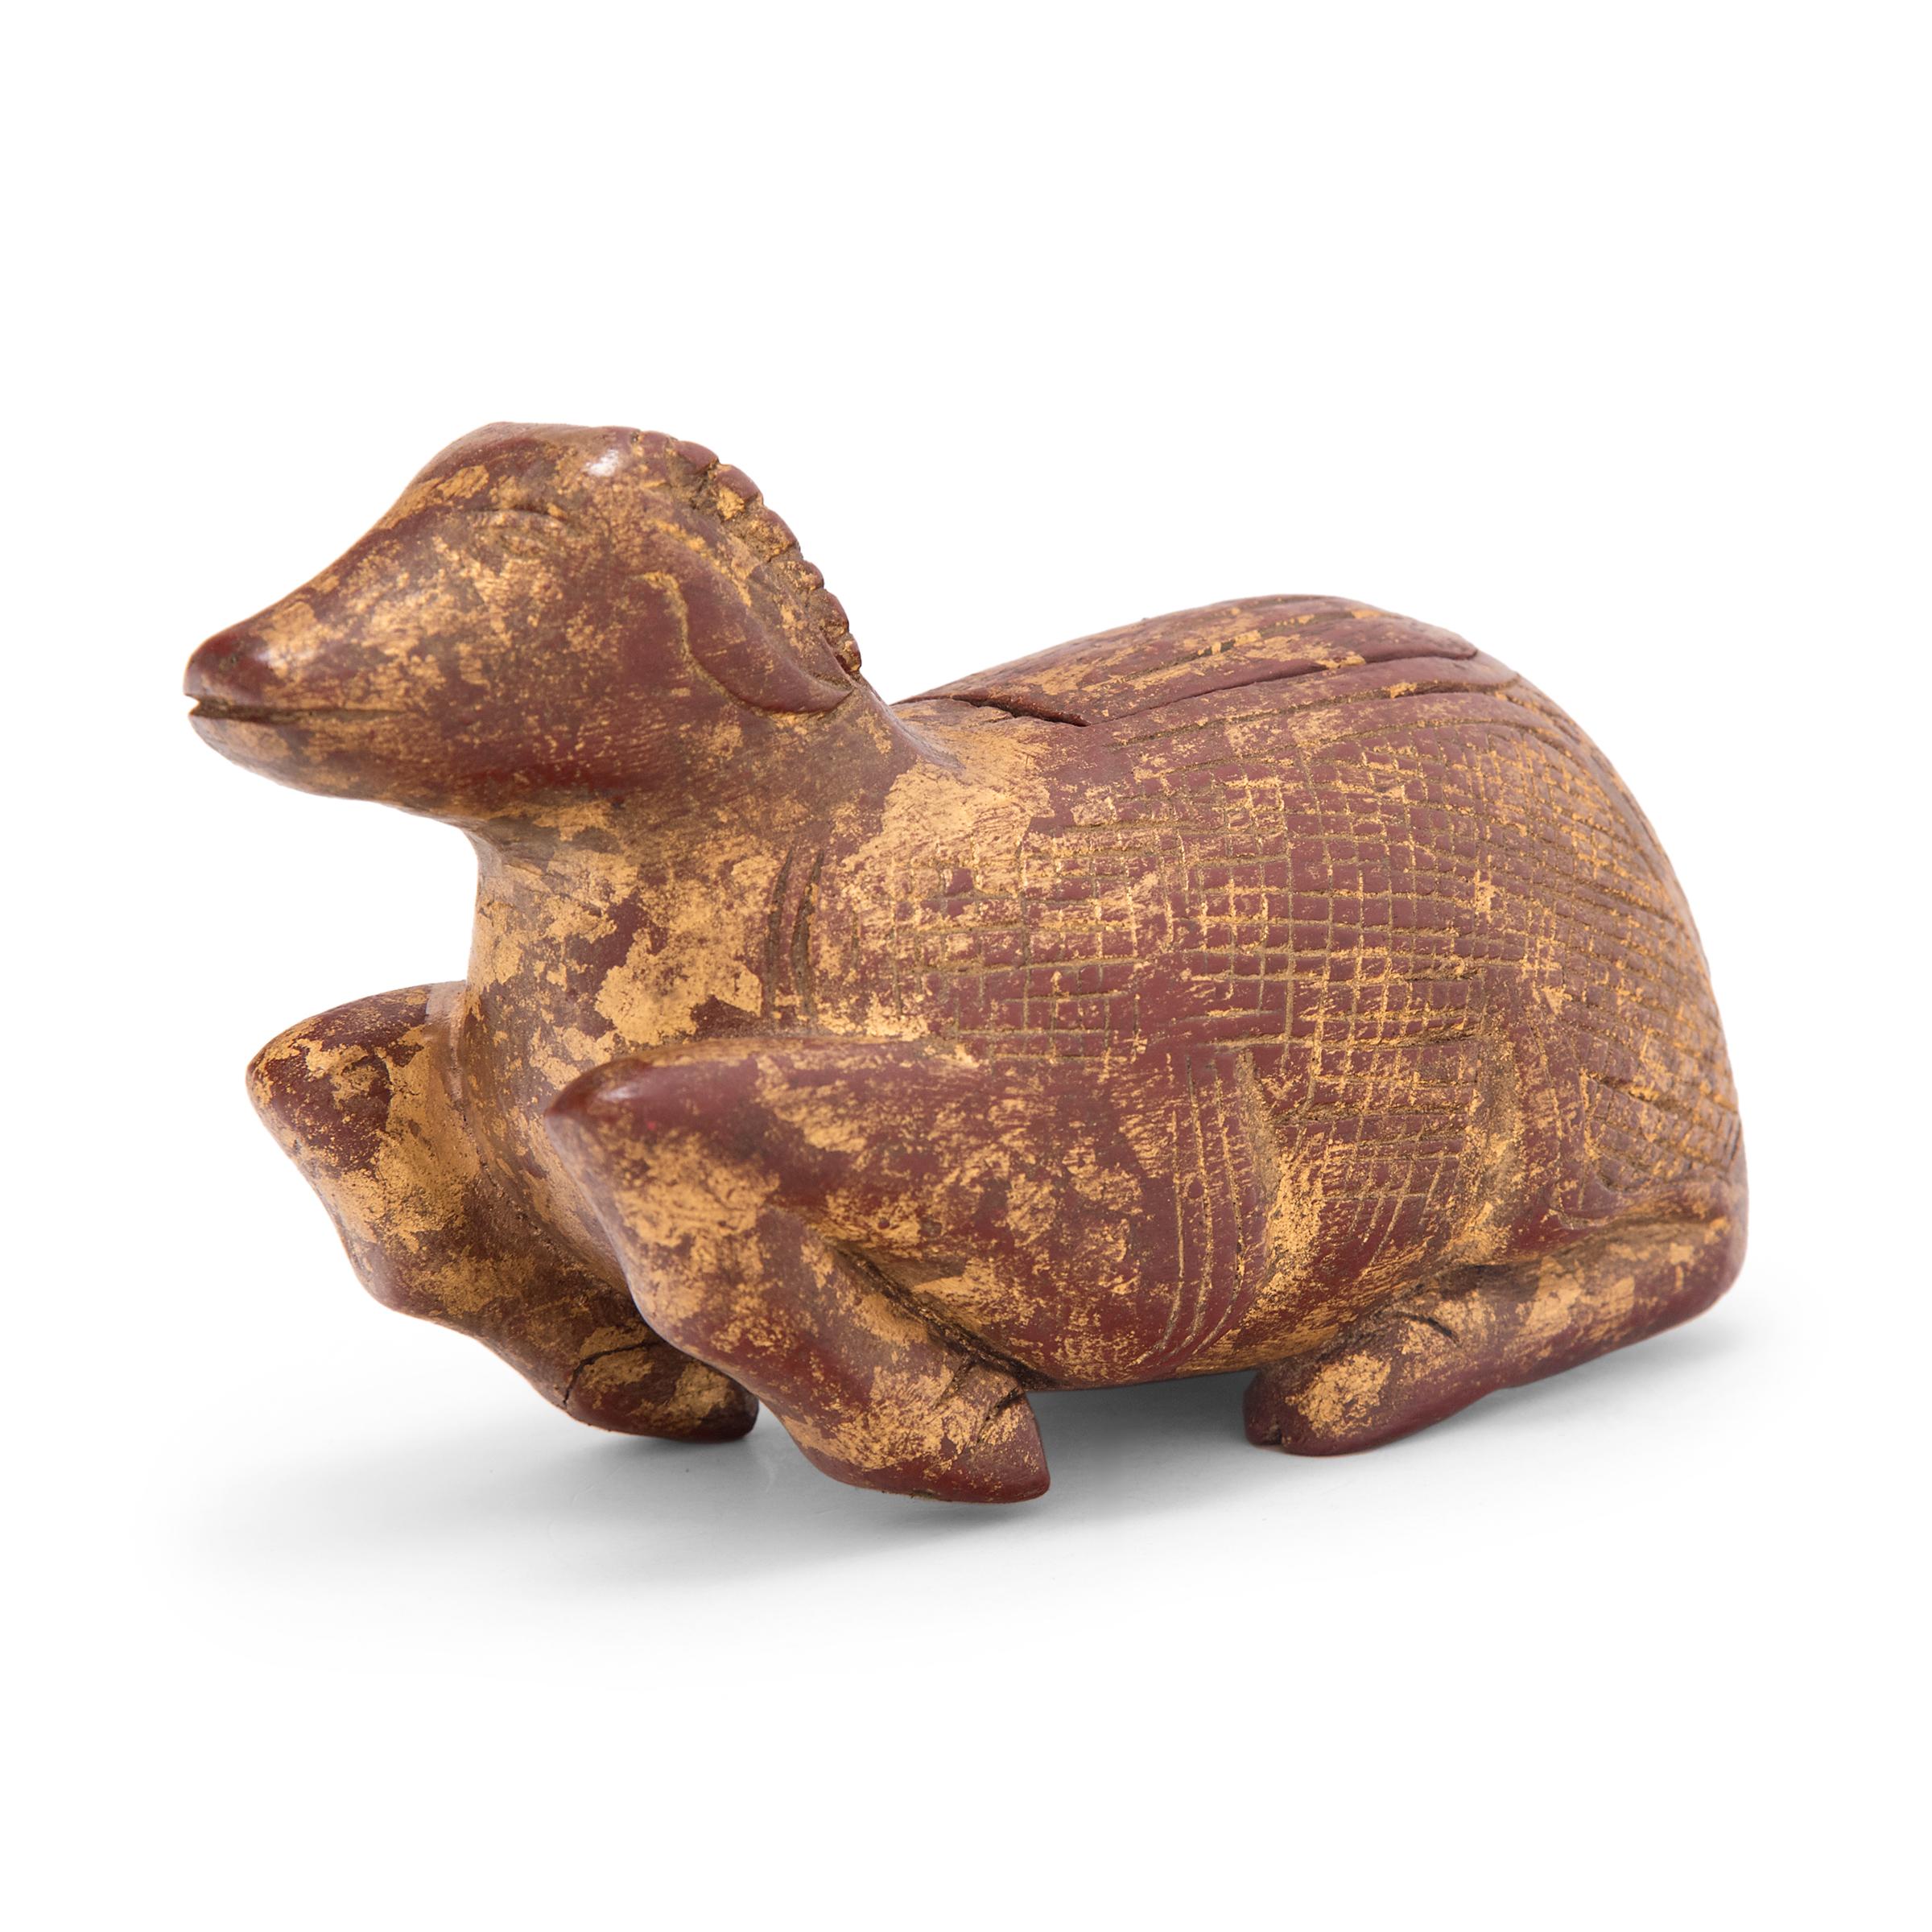 This petite gilt box is hand-carved in the form of a reclining ram or goat, a Buddhist symbol of immortality, power, determination. The ram has a relaxed posture, his feet tucked beneath his stomach and a calm expression on his face. The carved